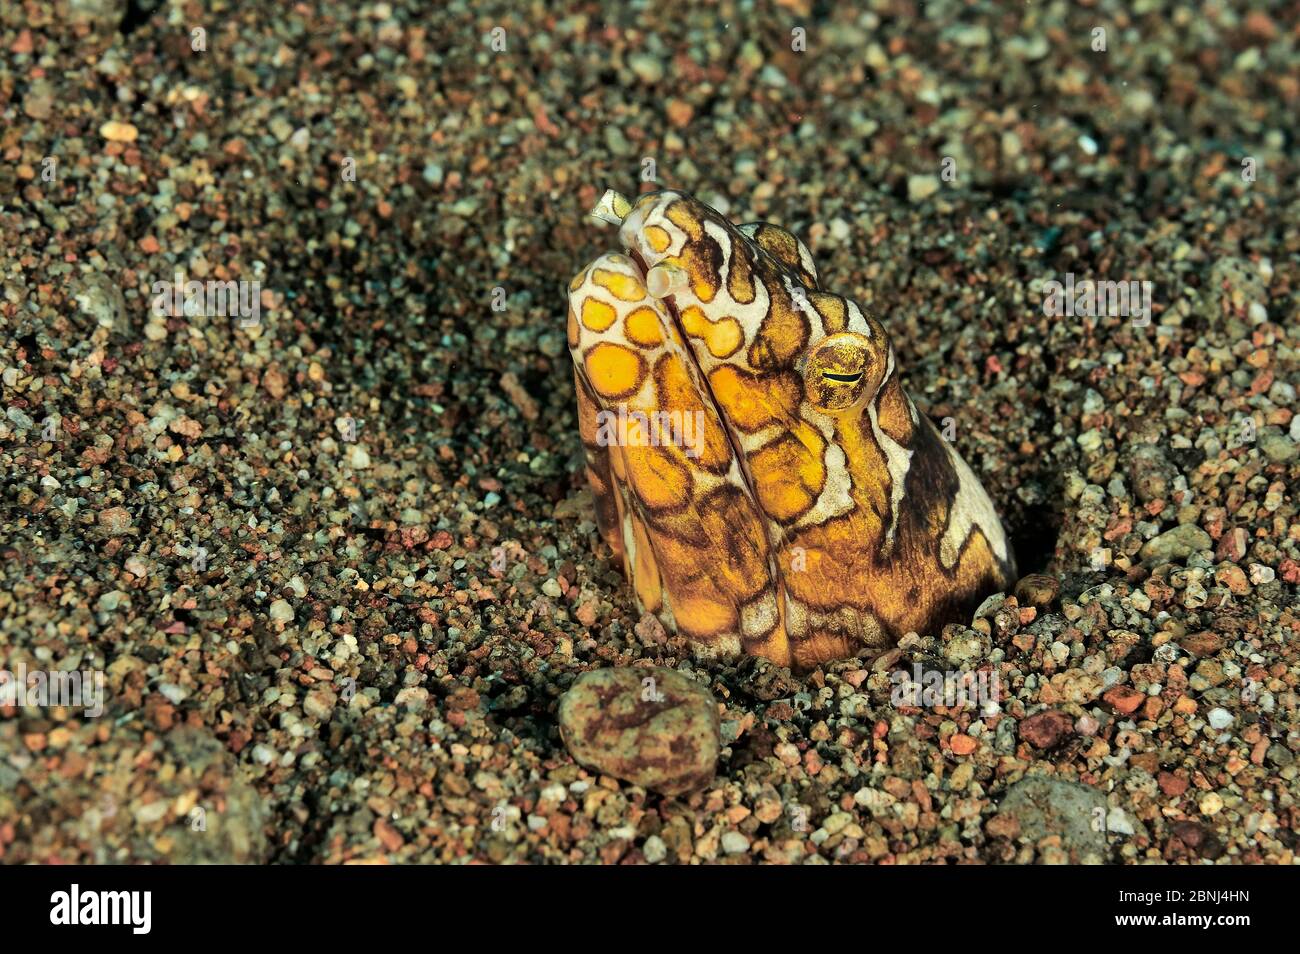 Bonapart's / Napoleon snake eel (Ophichthus bonaparti) head sticking out of sand, Sulu Sea, Philippines Stock Photo